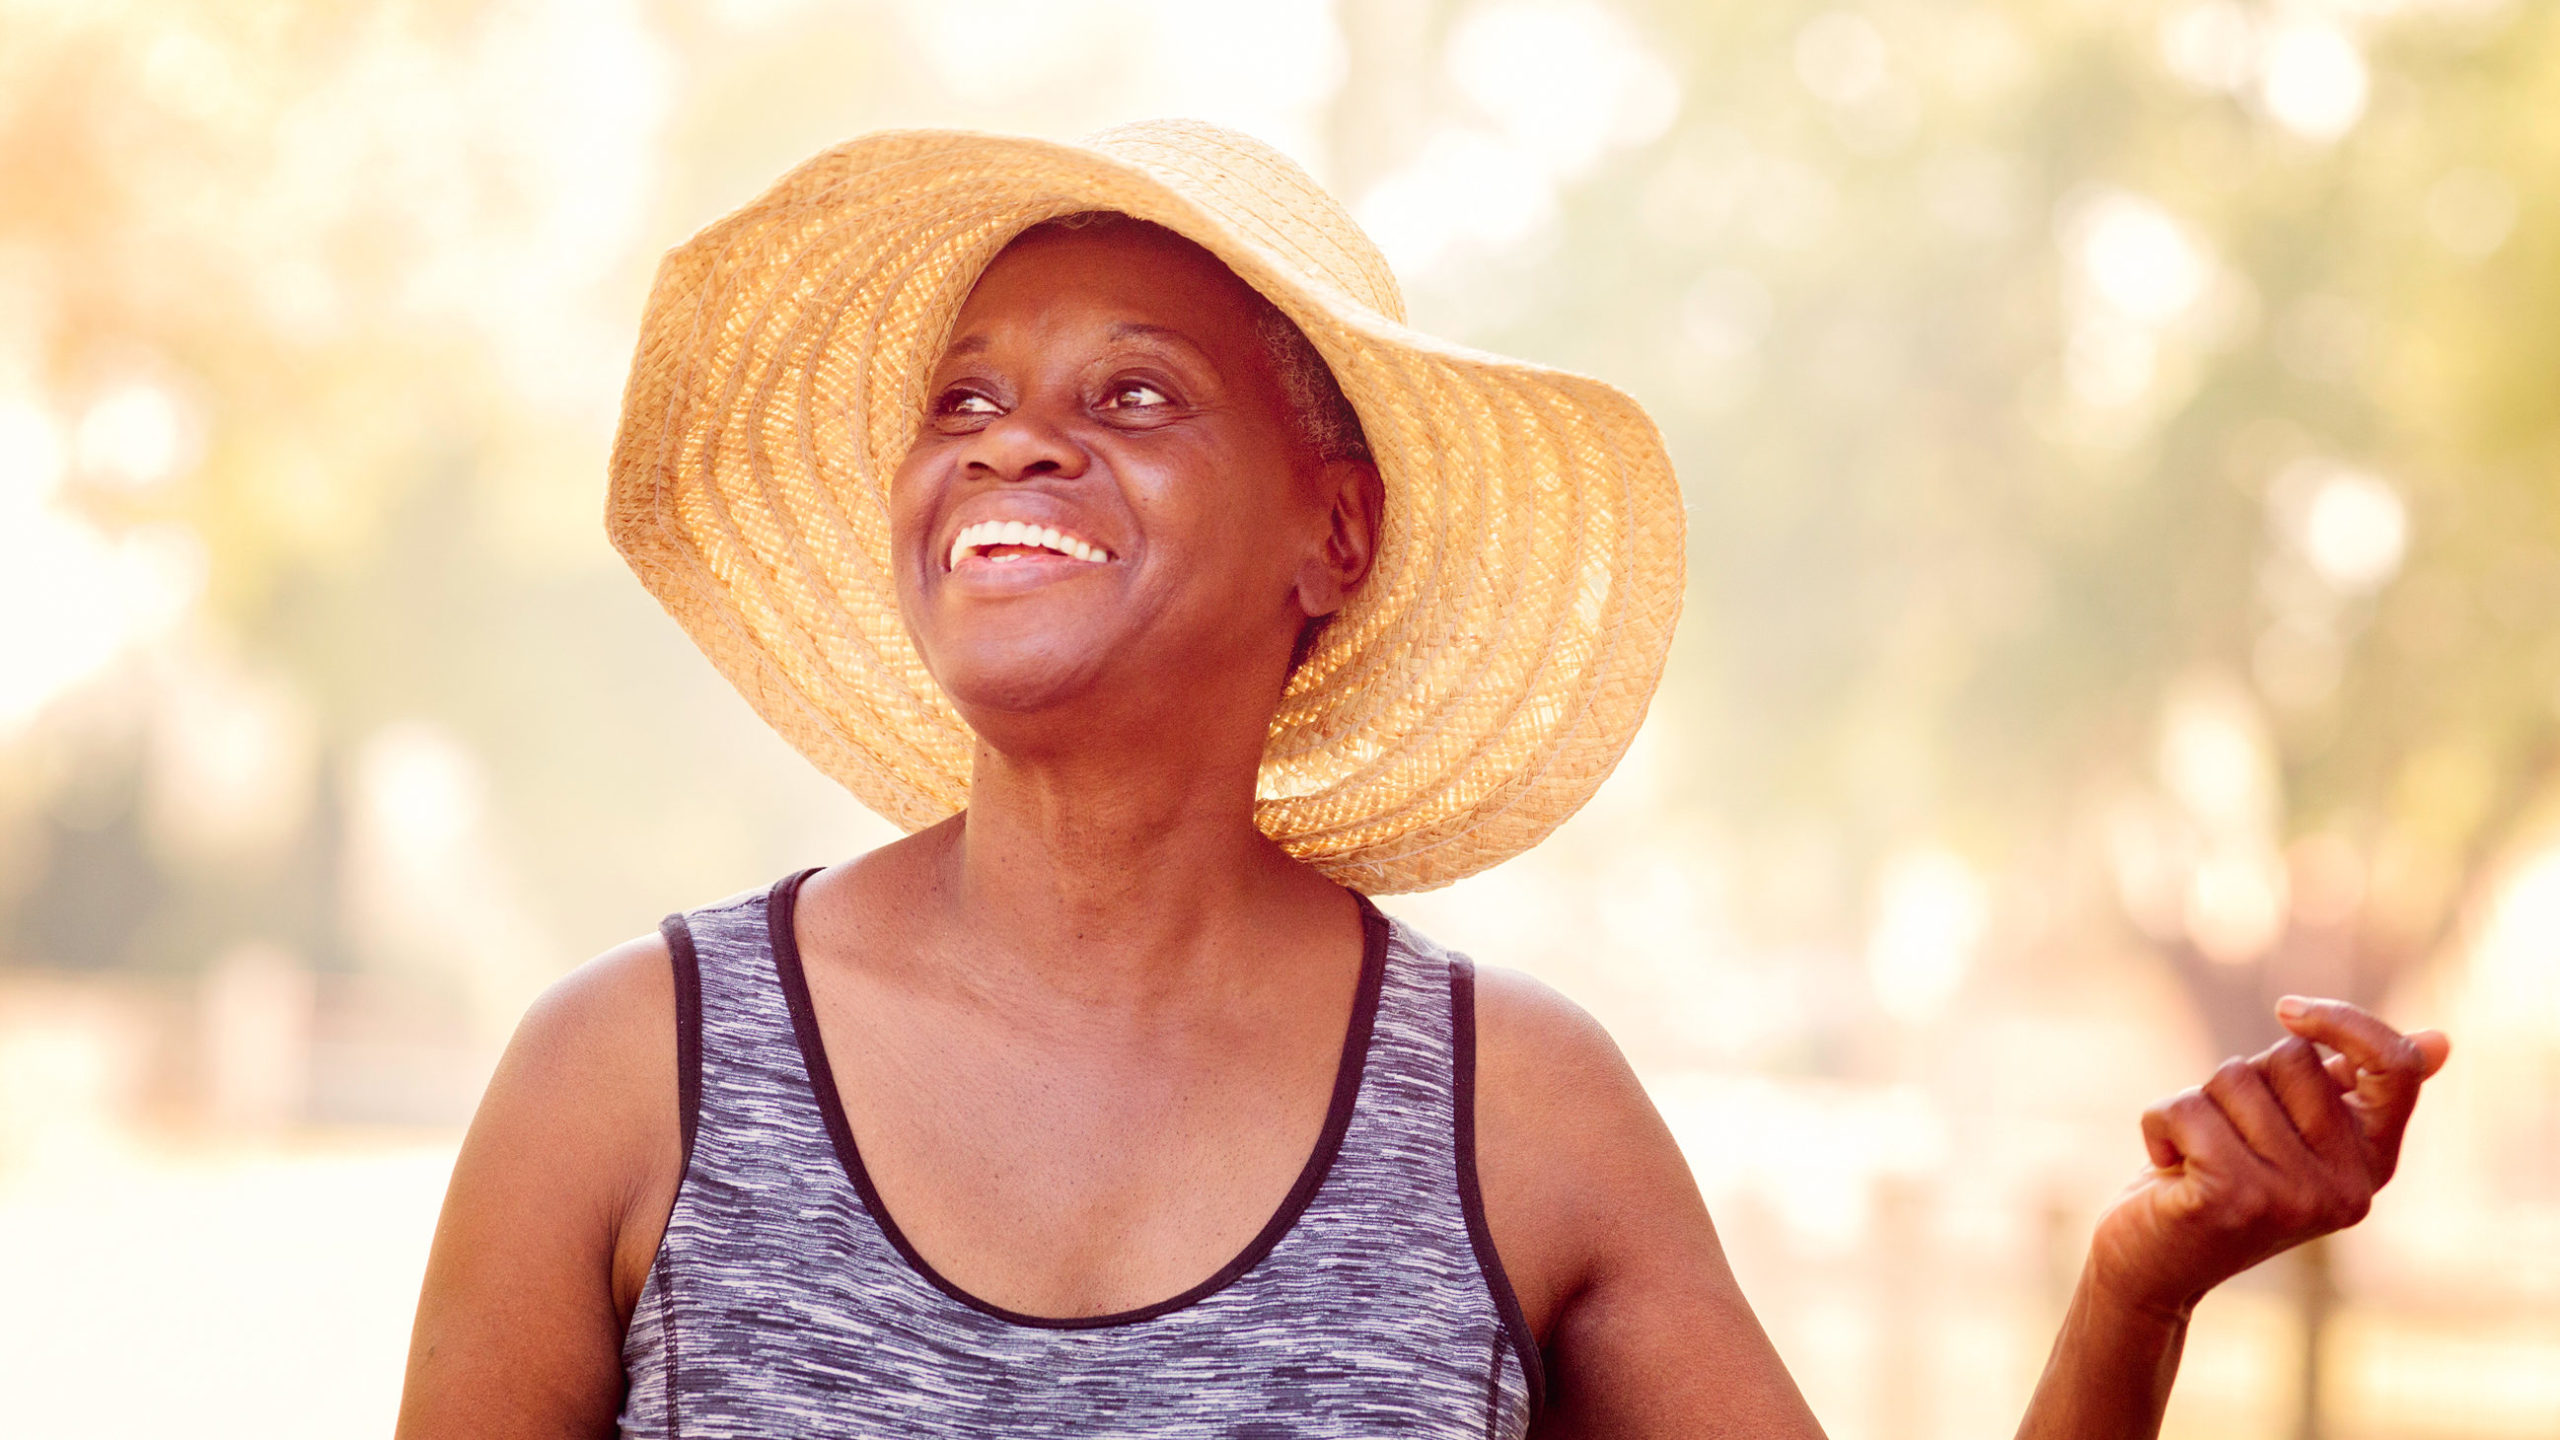 Woman in tank top and sun hat smiling outside.